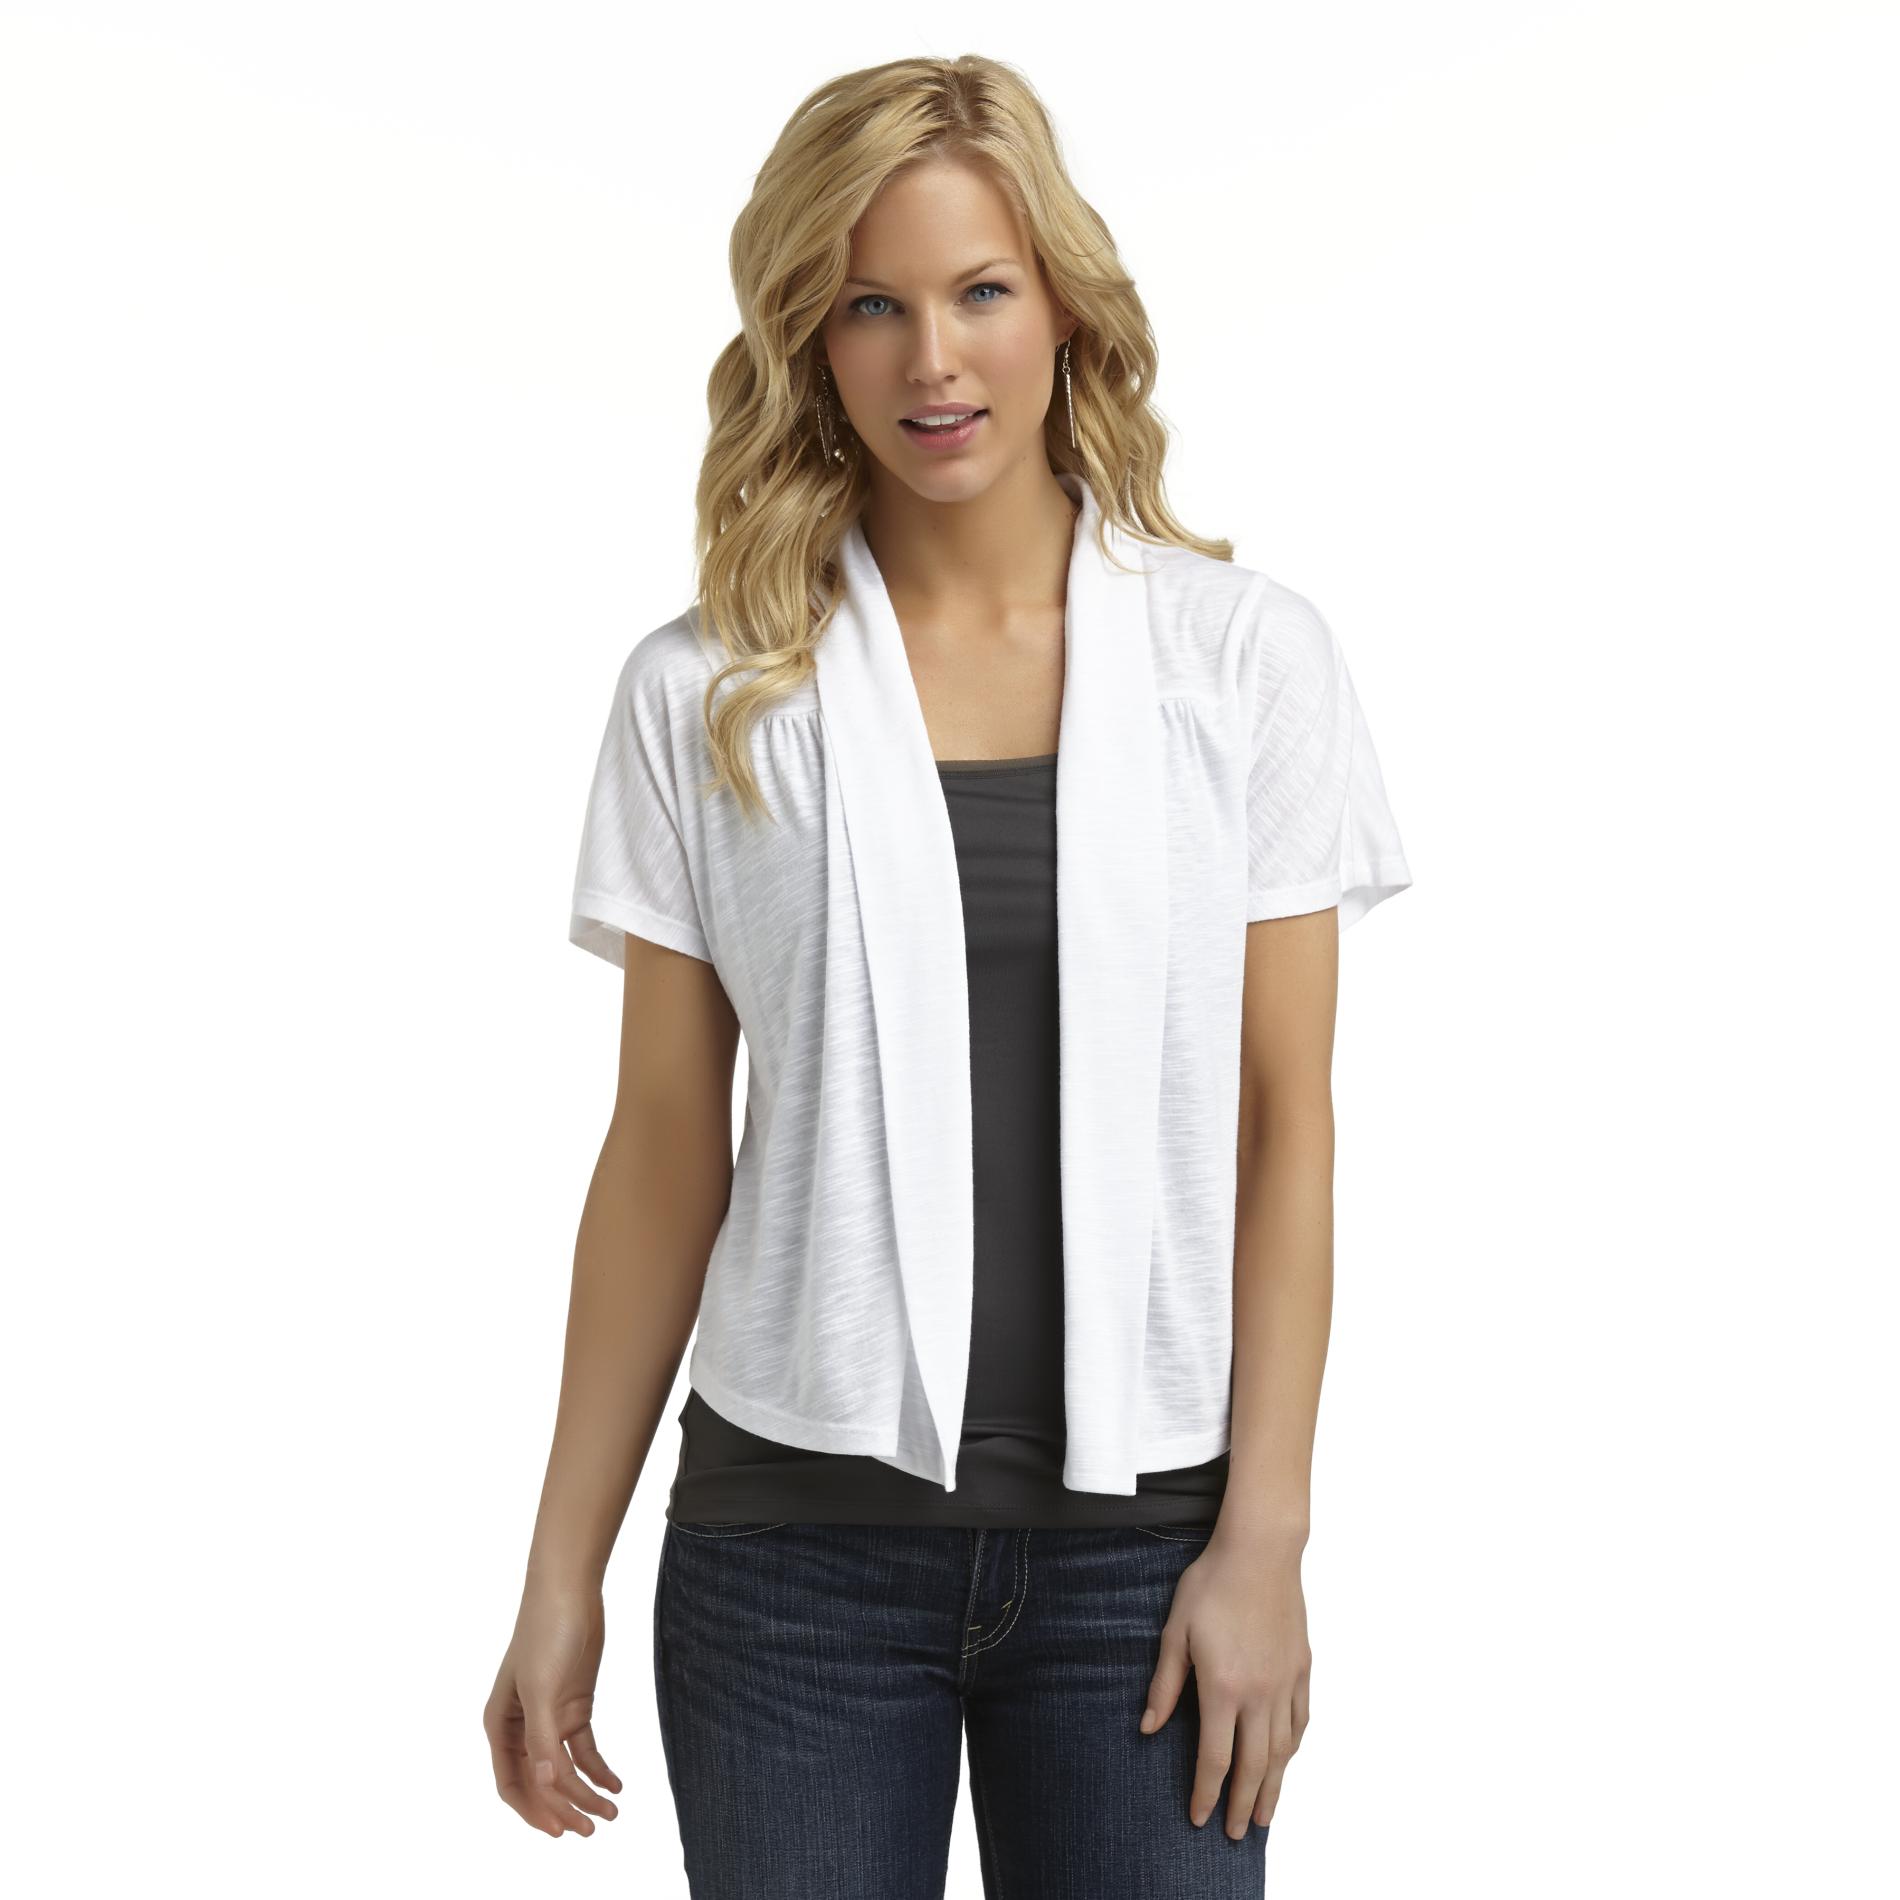 Attention Women's Fly-Away Short-Sleeve Cardigan